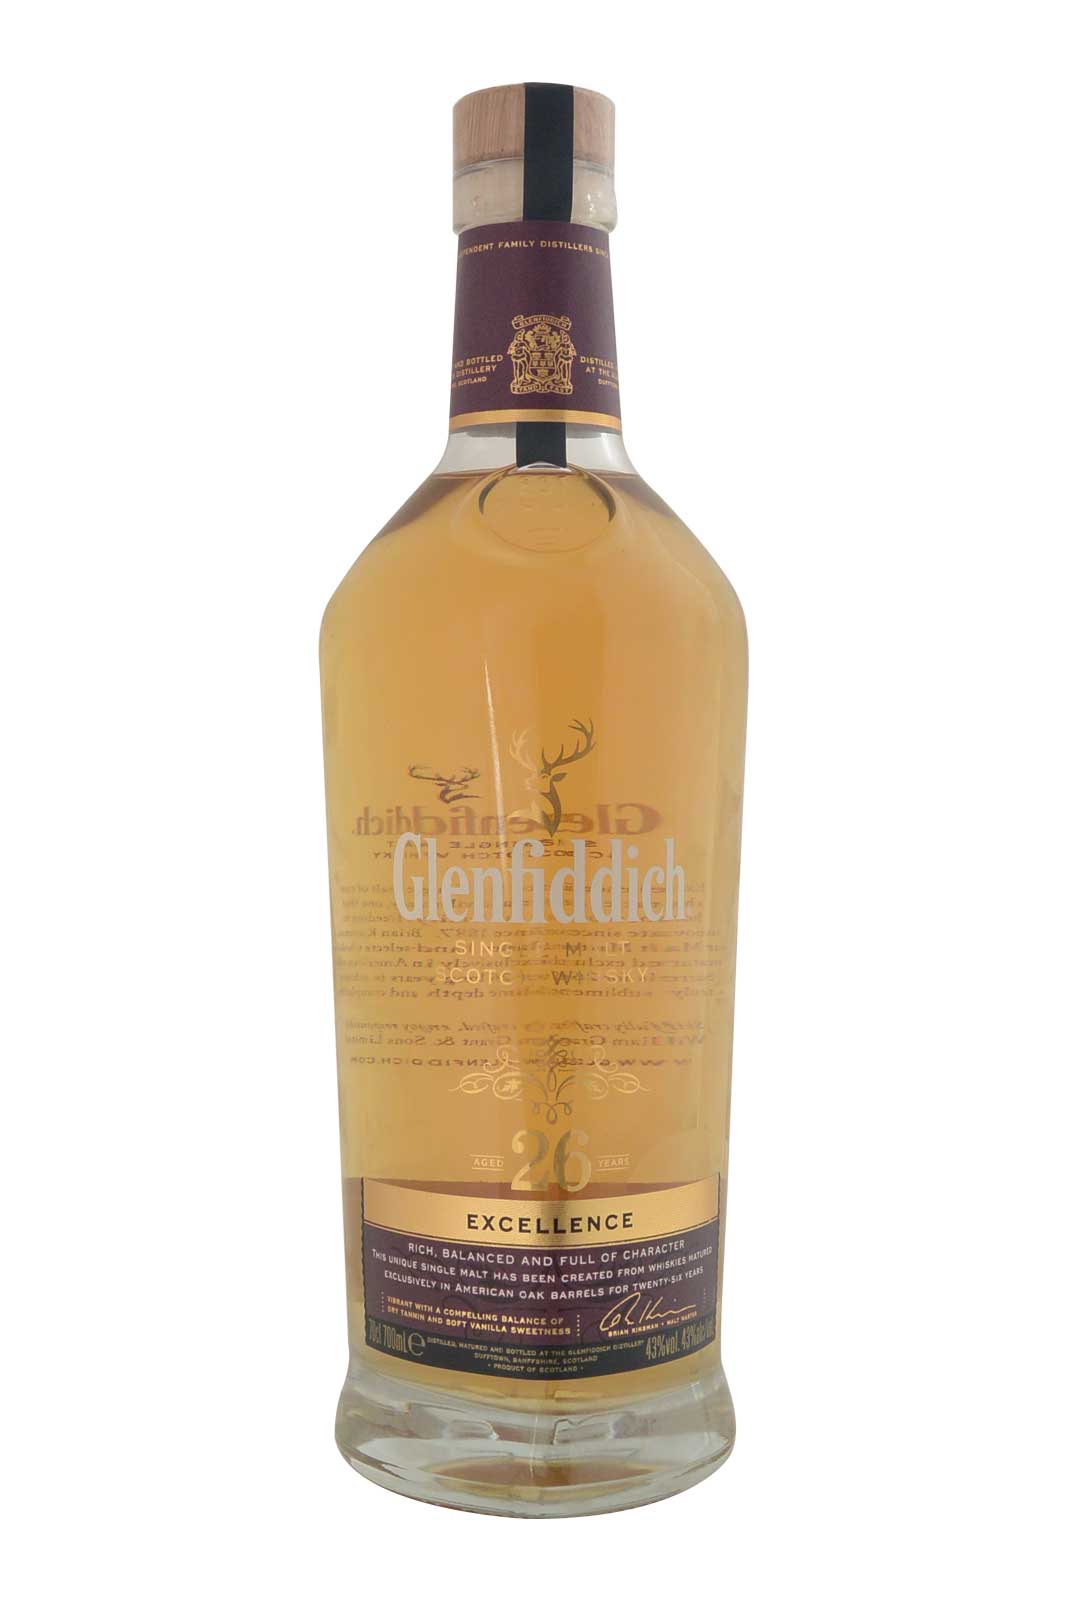 Glenfiddich 26 Year Old - Excellence